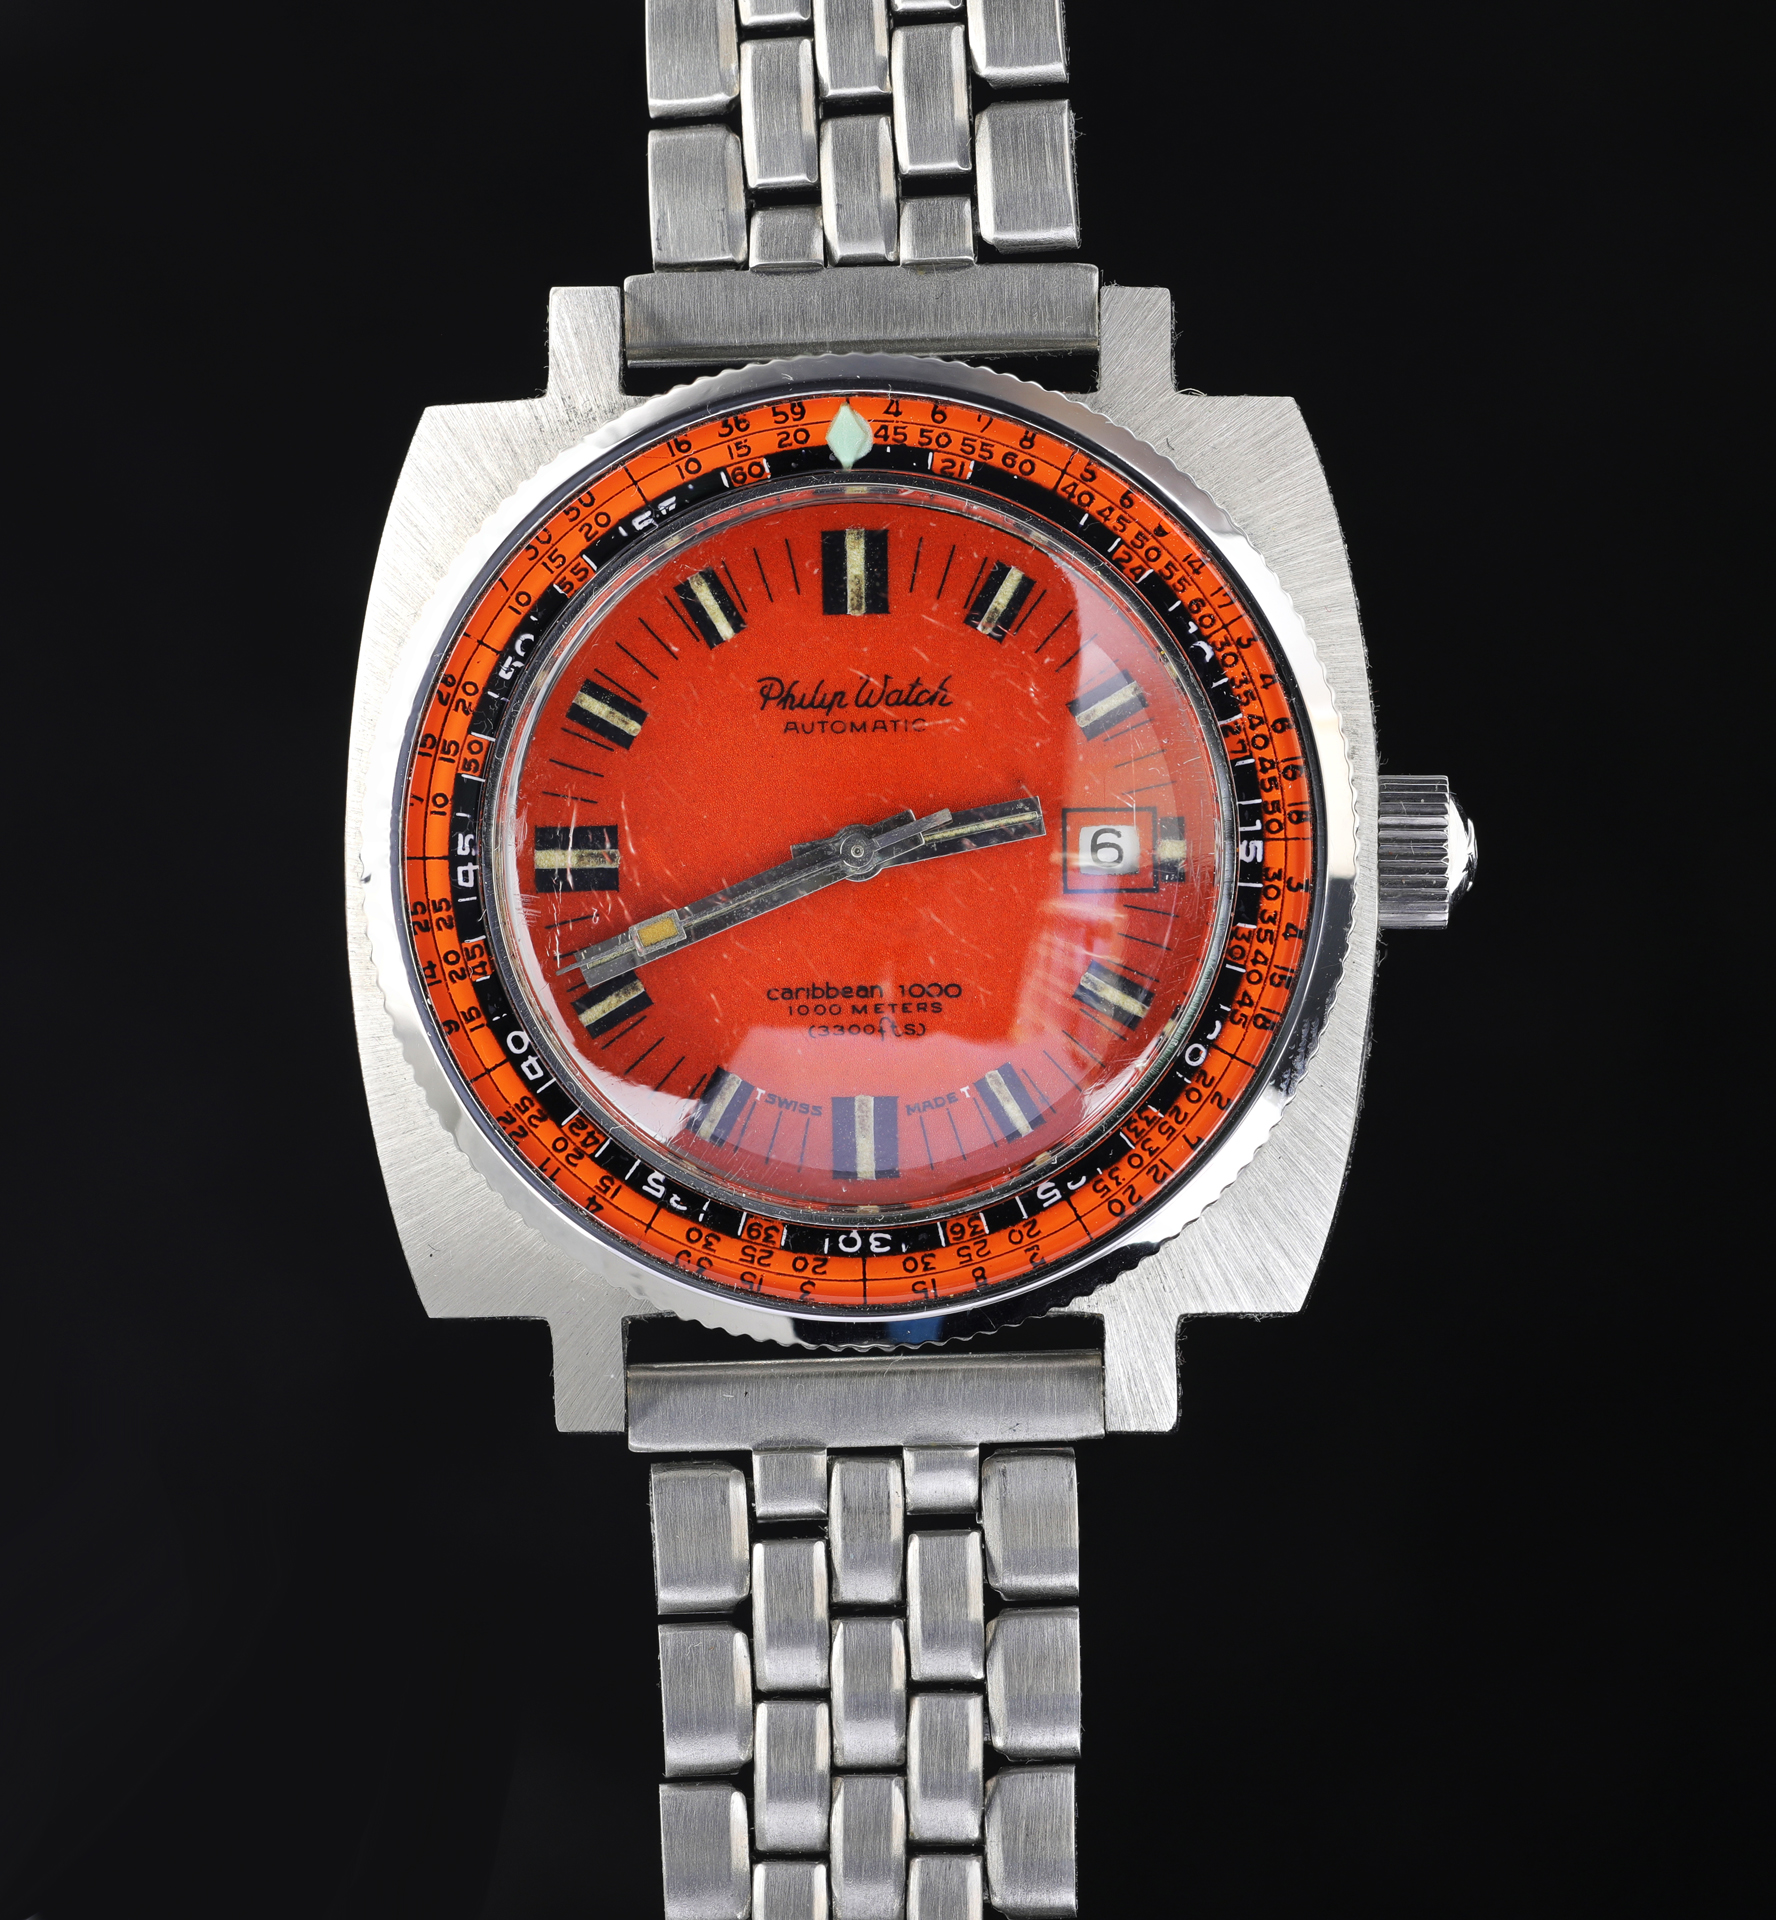 philip watch red square caribbean vintage wacthes stefano mazzariol